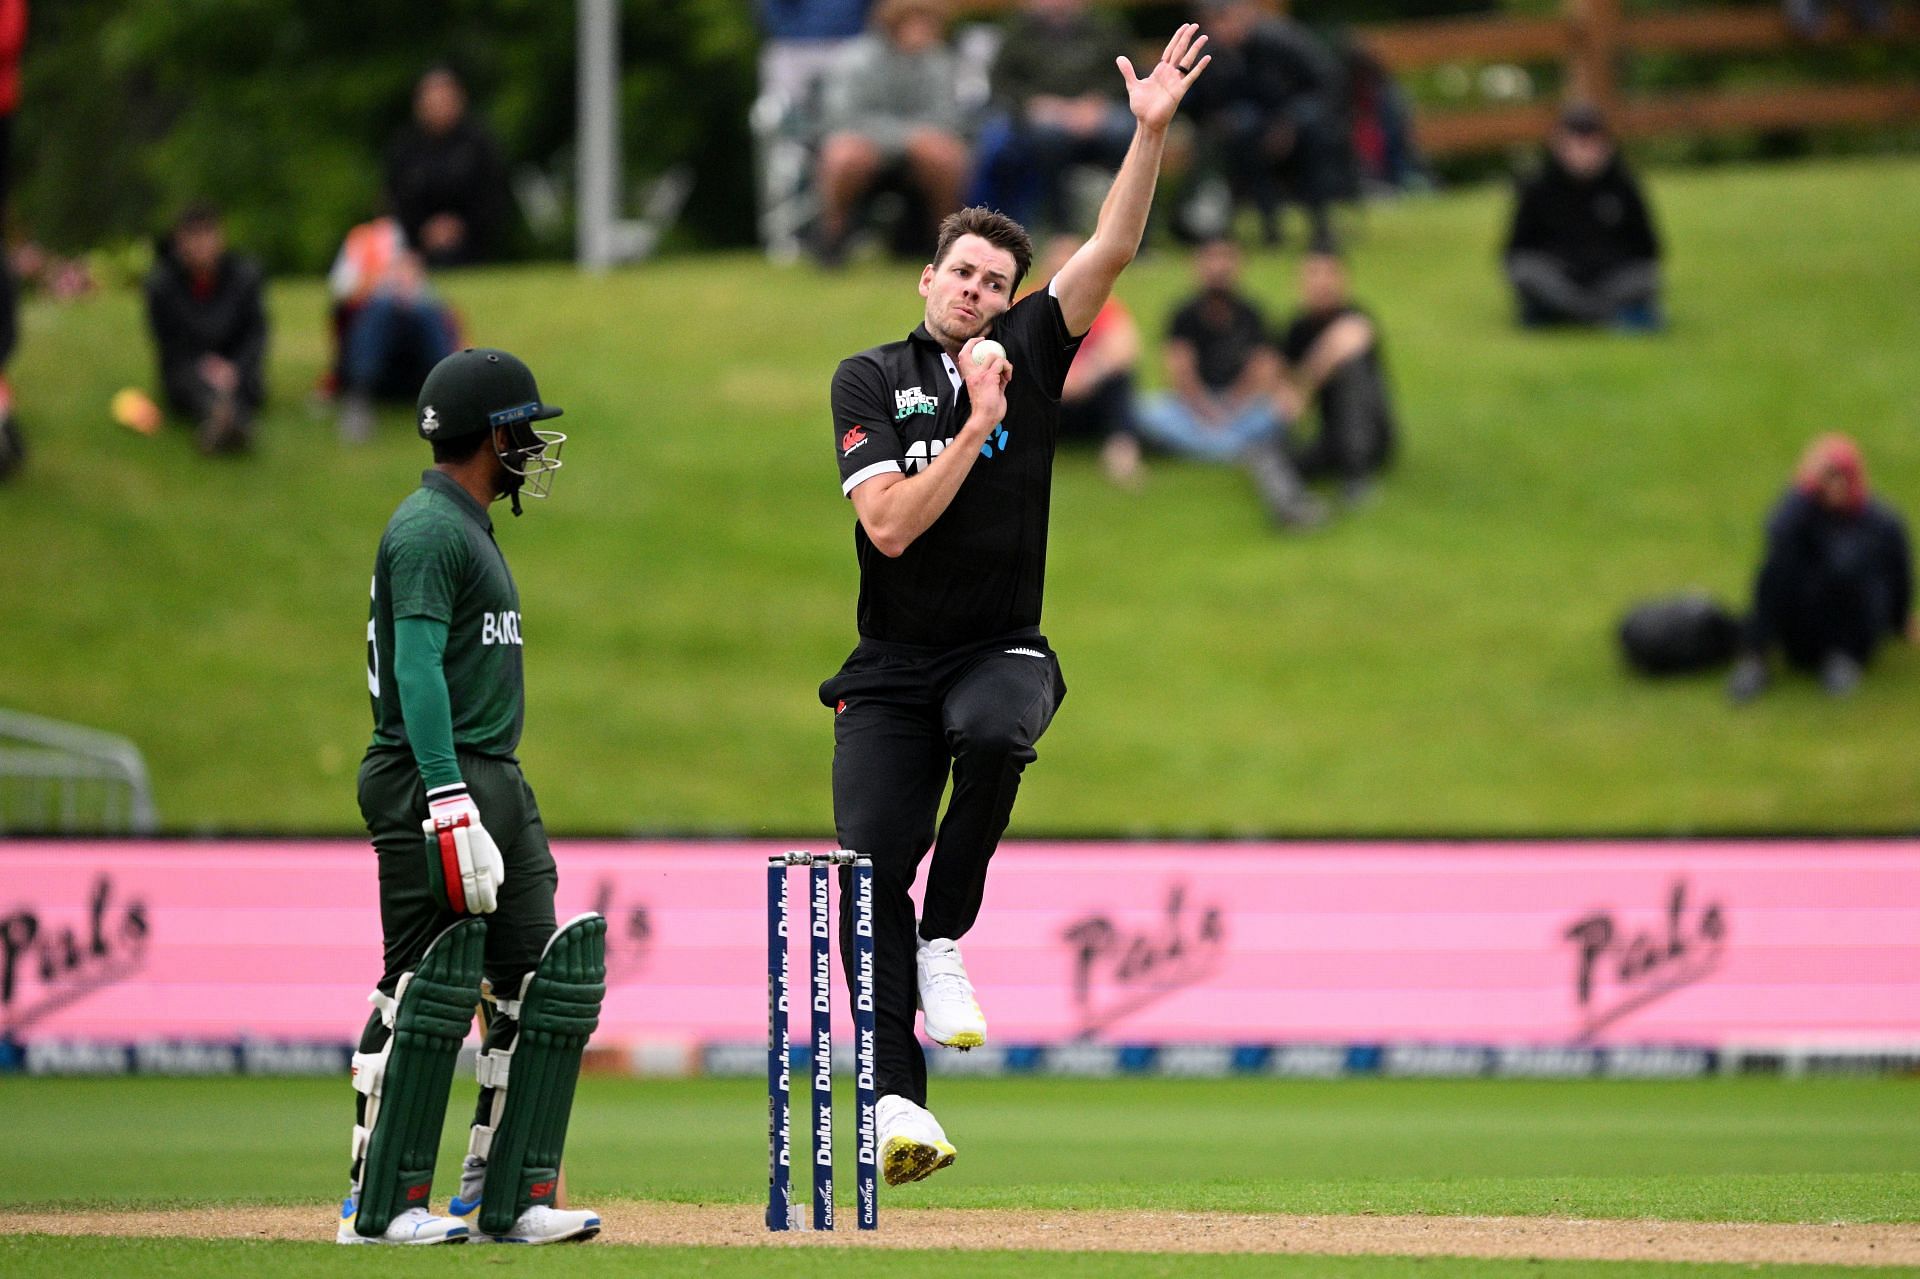 Duffy has already played for New Zealand in the white-ball formats.